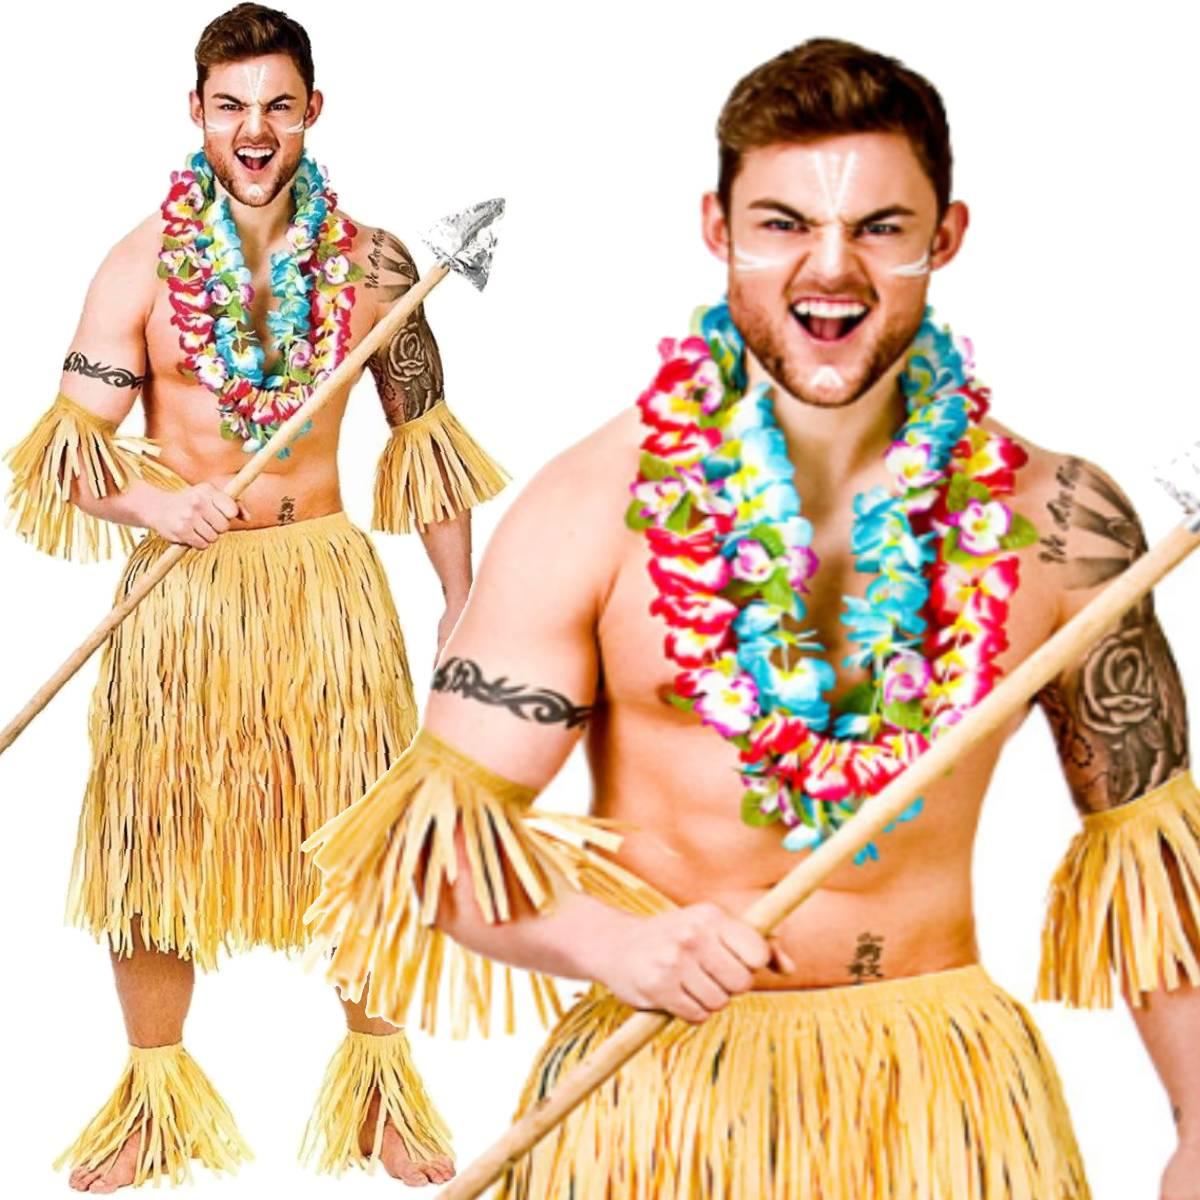 Hawaiian Party Guy Adult Costume 5pc Set by Wicked HAW-9434 available here at Karnival Costumes online party shop